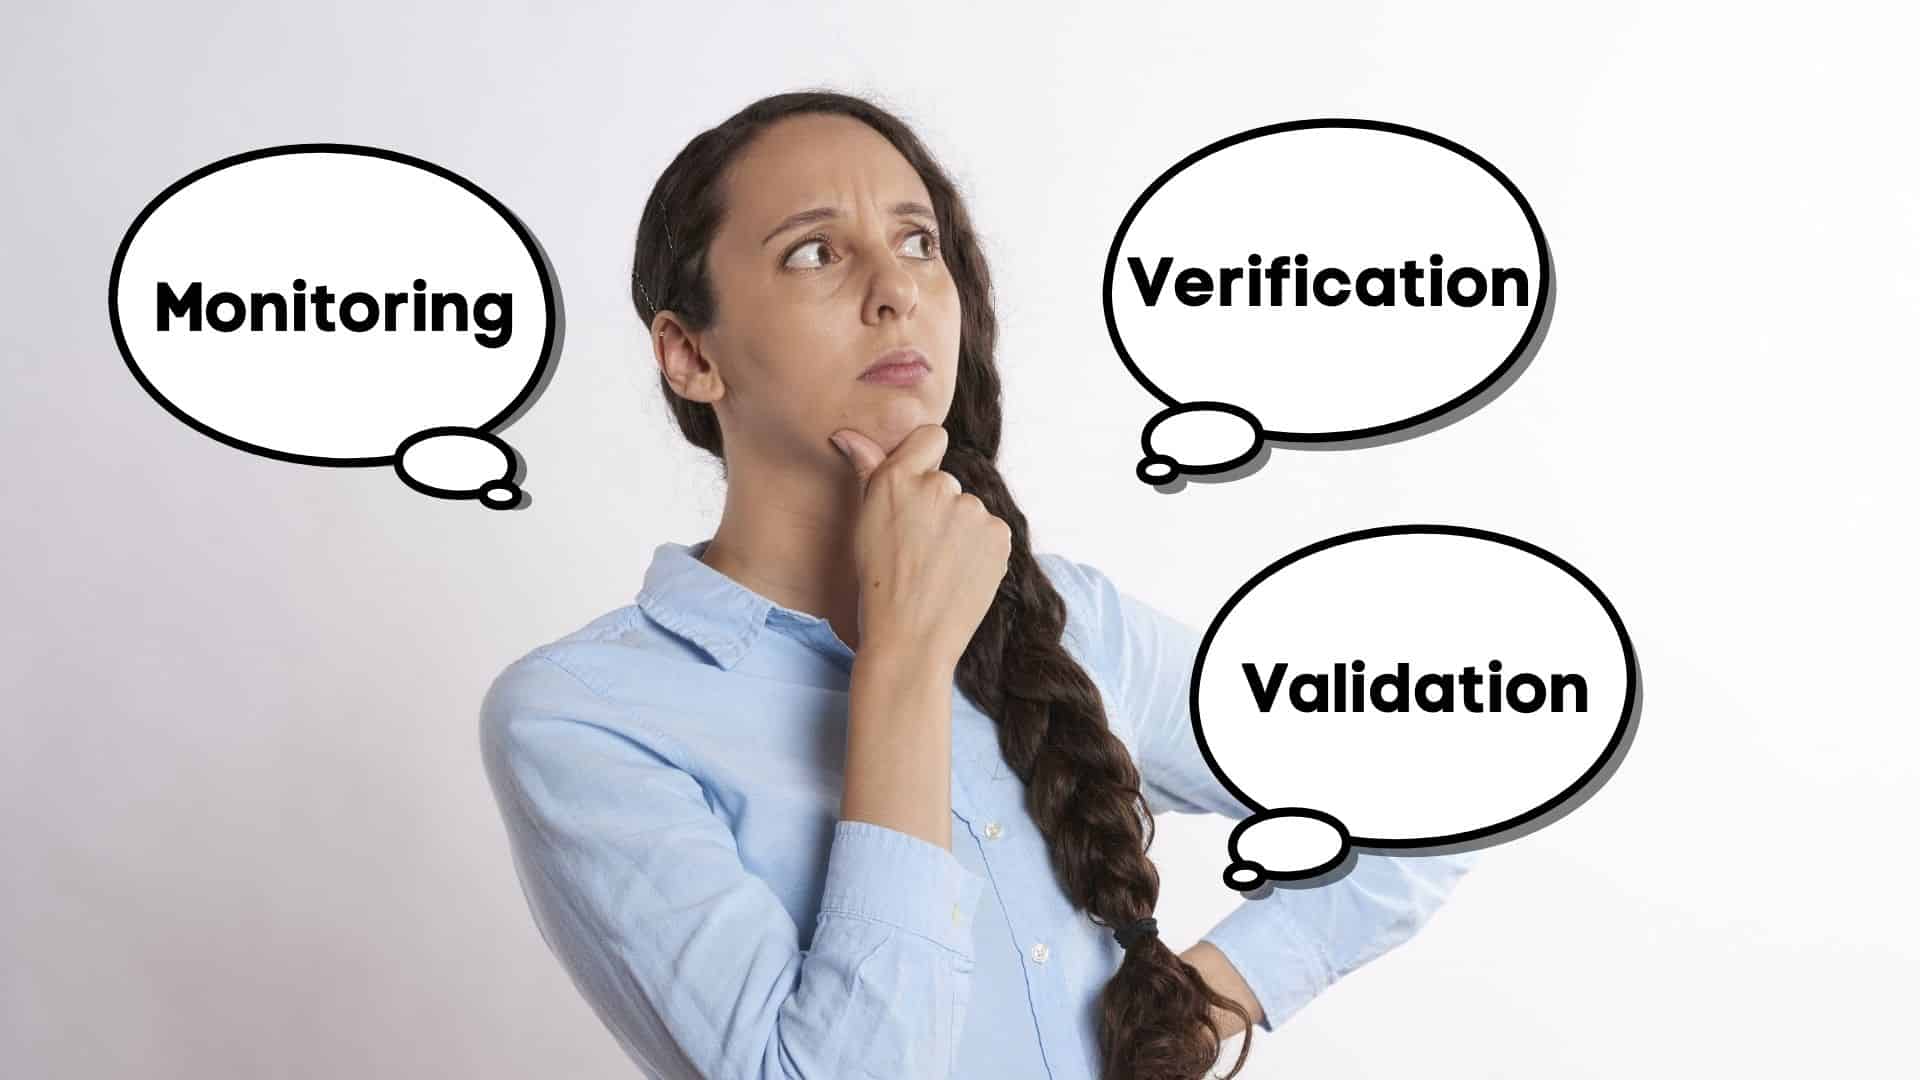 What is validation, verification, monitoring